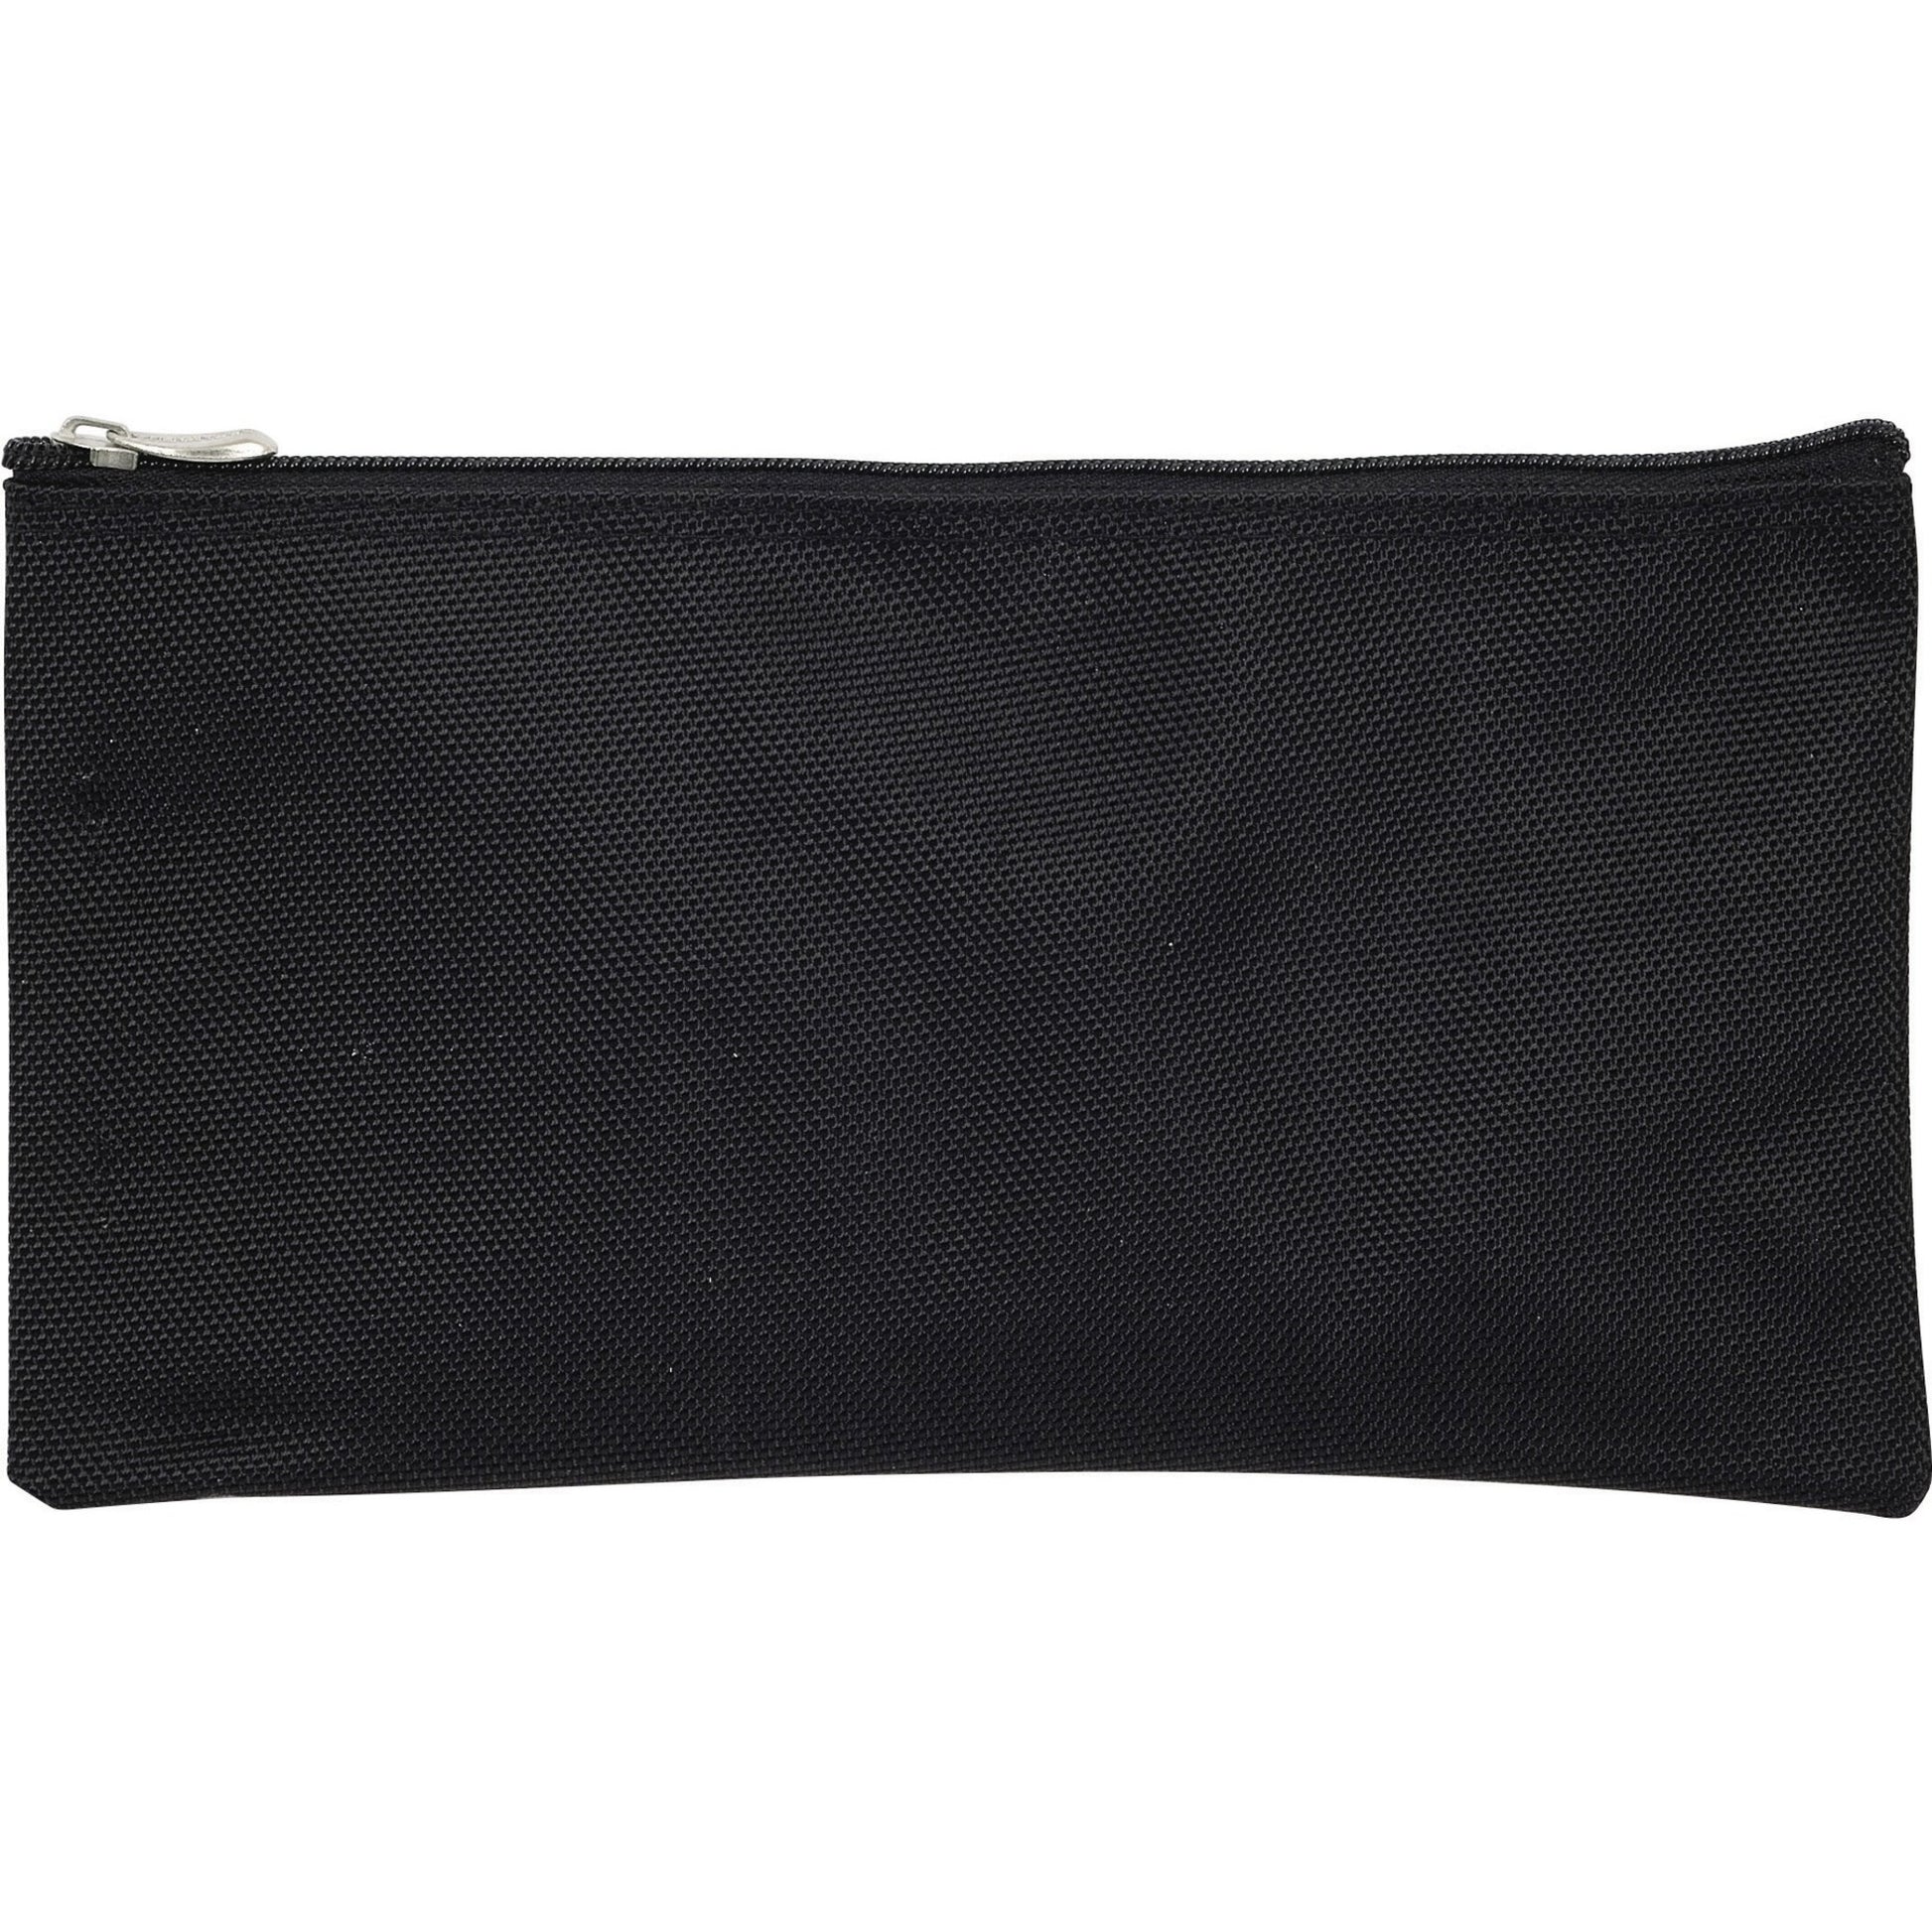 Merangue Carrying Case (Pouch) School Stationery, Money, Accessories - Black